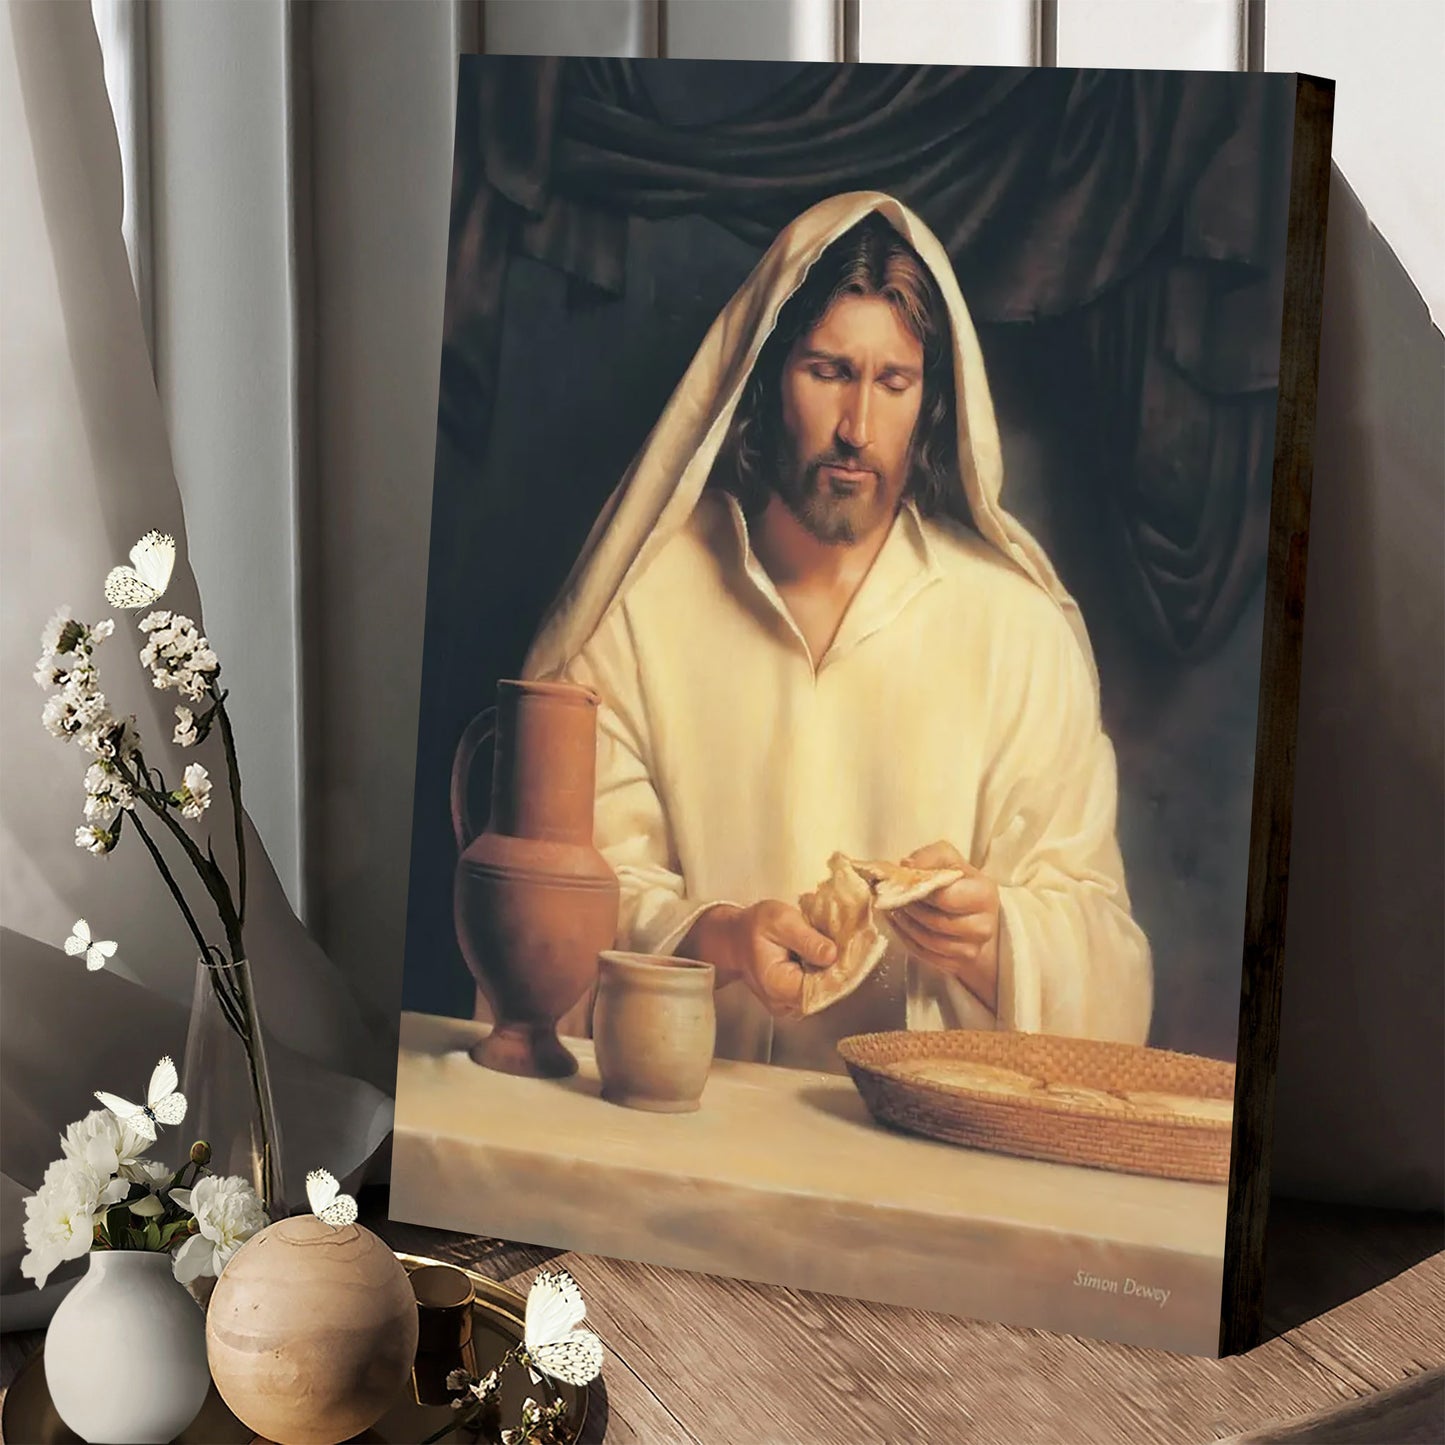 Jesus Breaking Bread Canvas Picture - Jesus Christ Canvas Art - Christian Wall Canvas.png